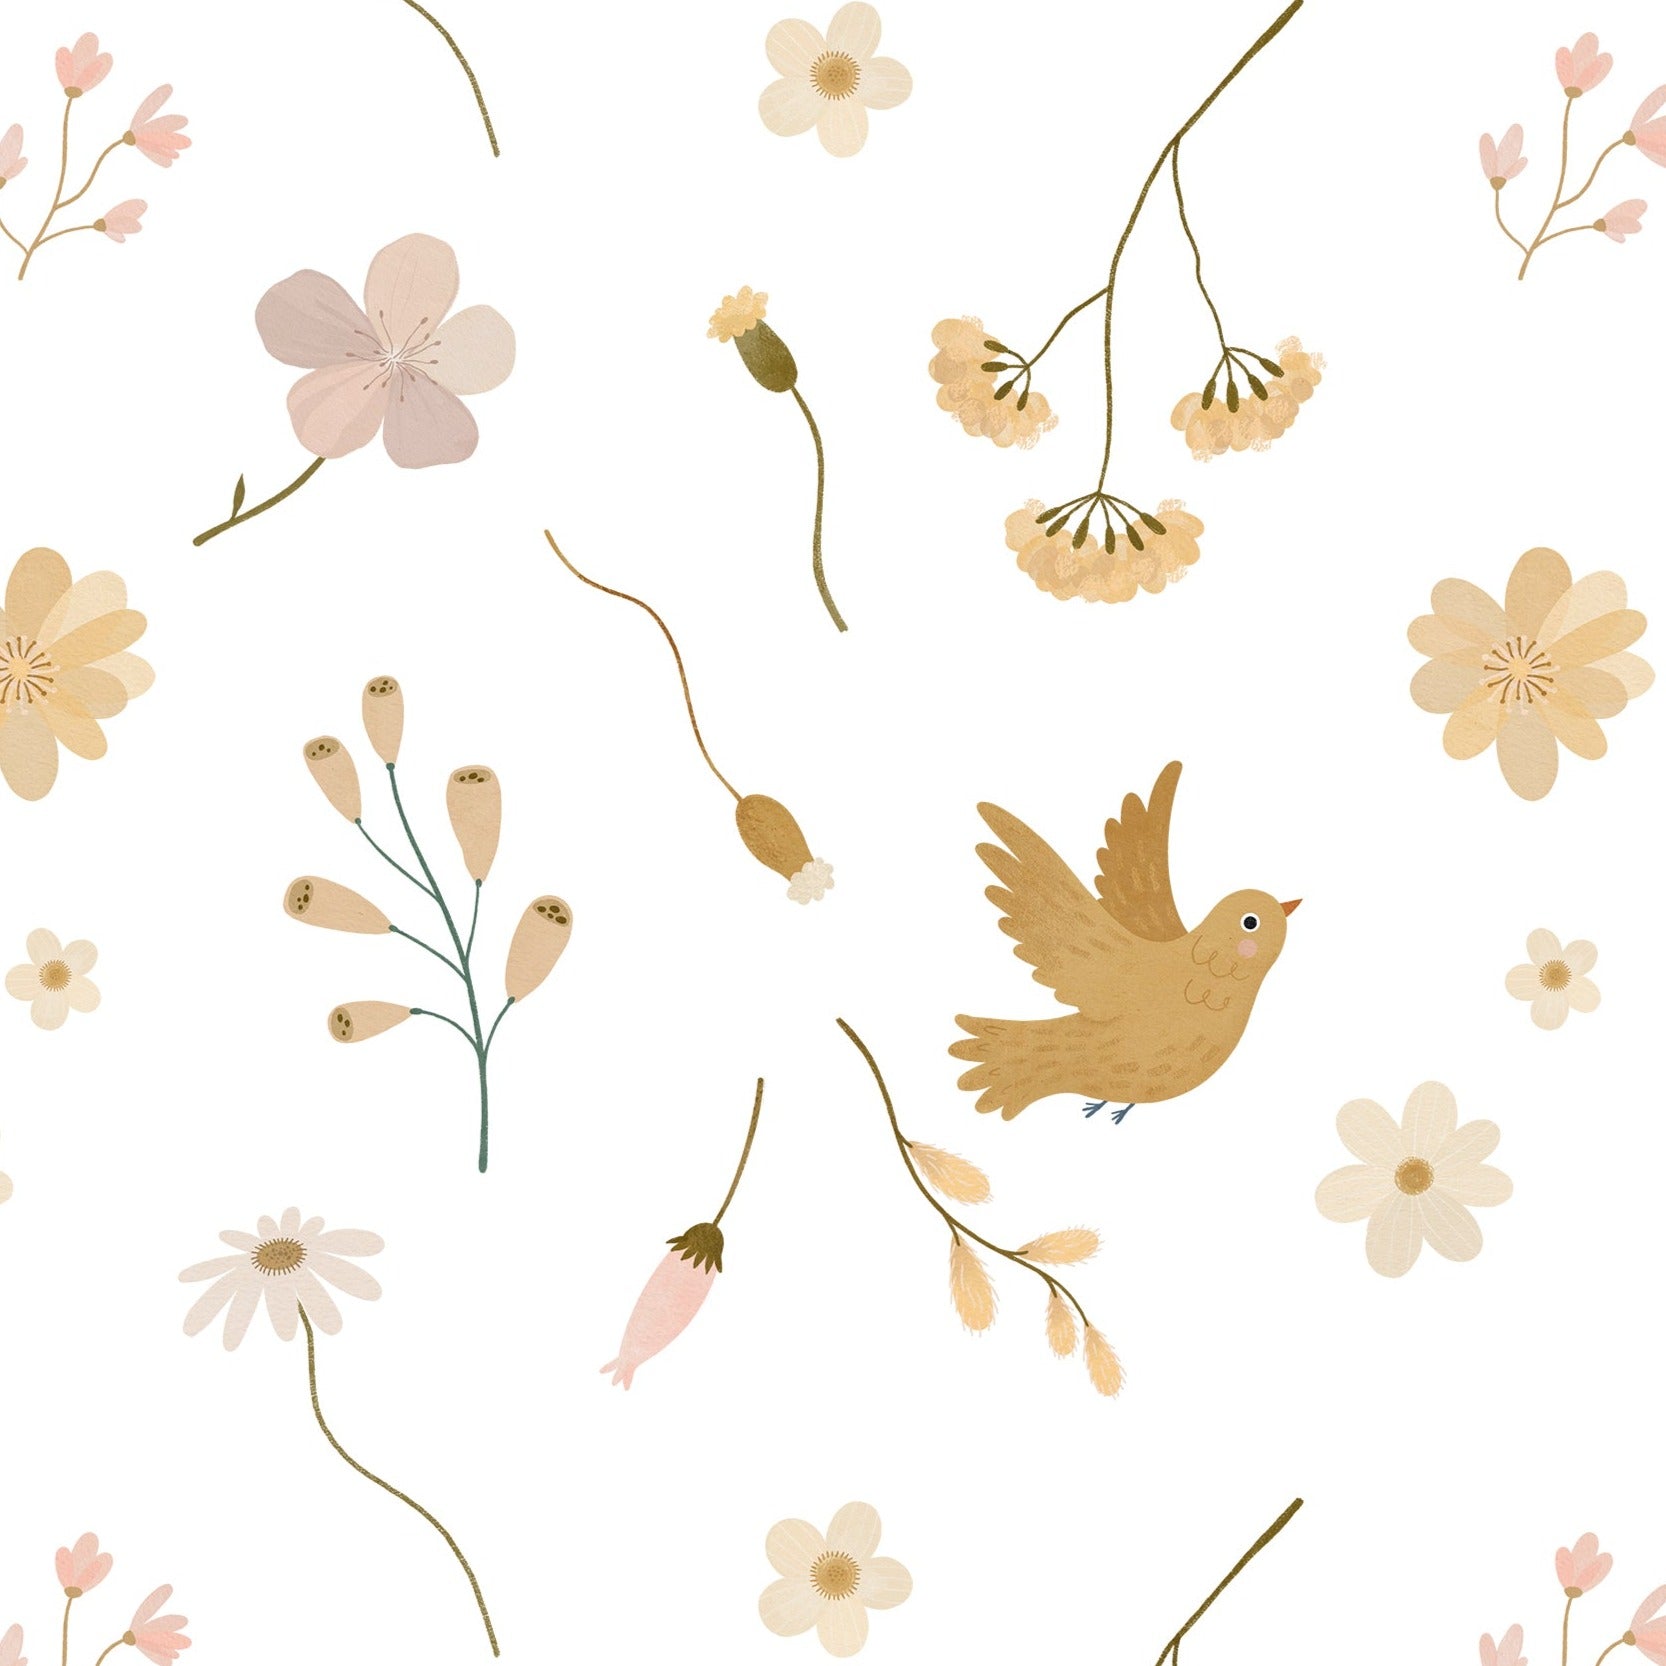 A close-up view of the Pastel and Paradise Wallpaper, showcasing a delicate design of golden birds and pale flowers scattered across a white background, creating a serene and inviting pattern.